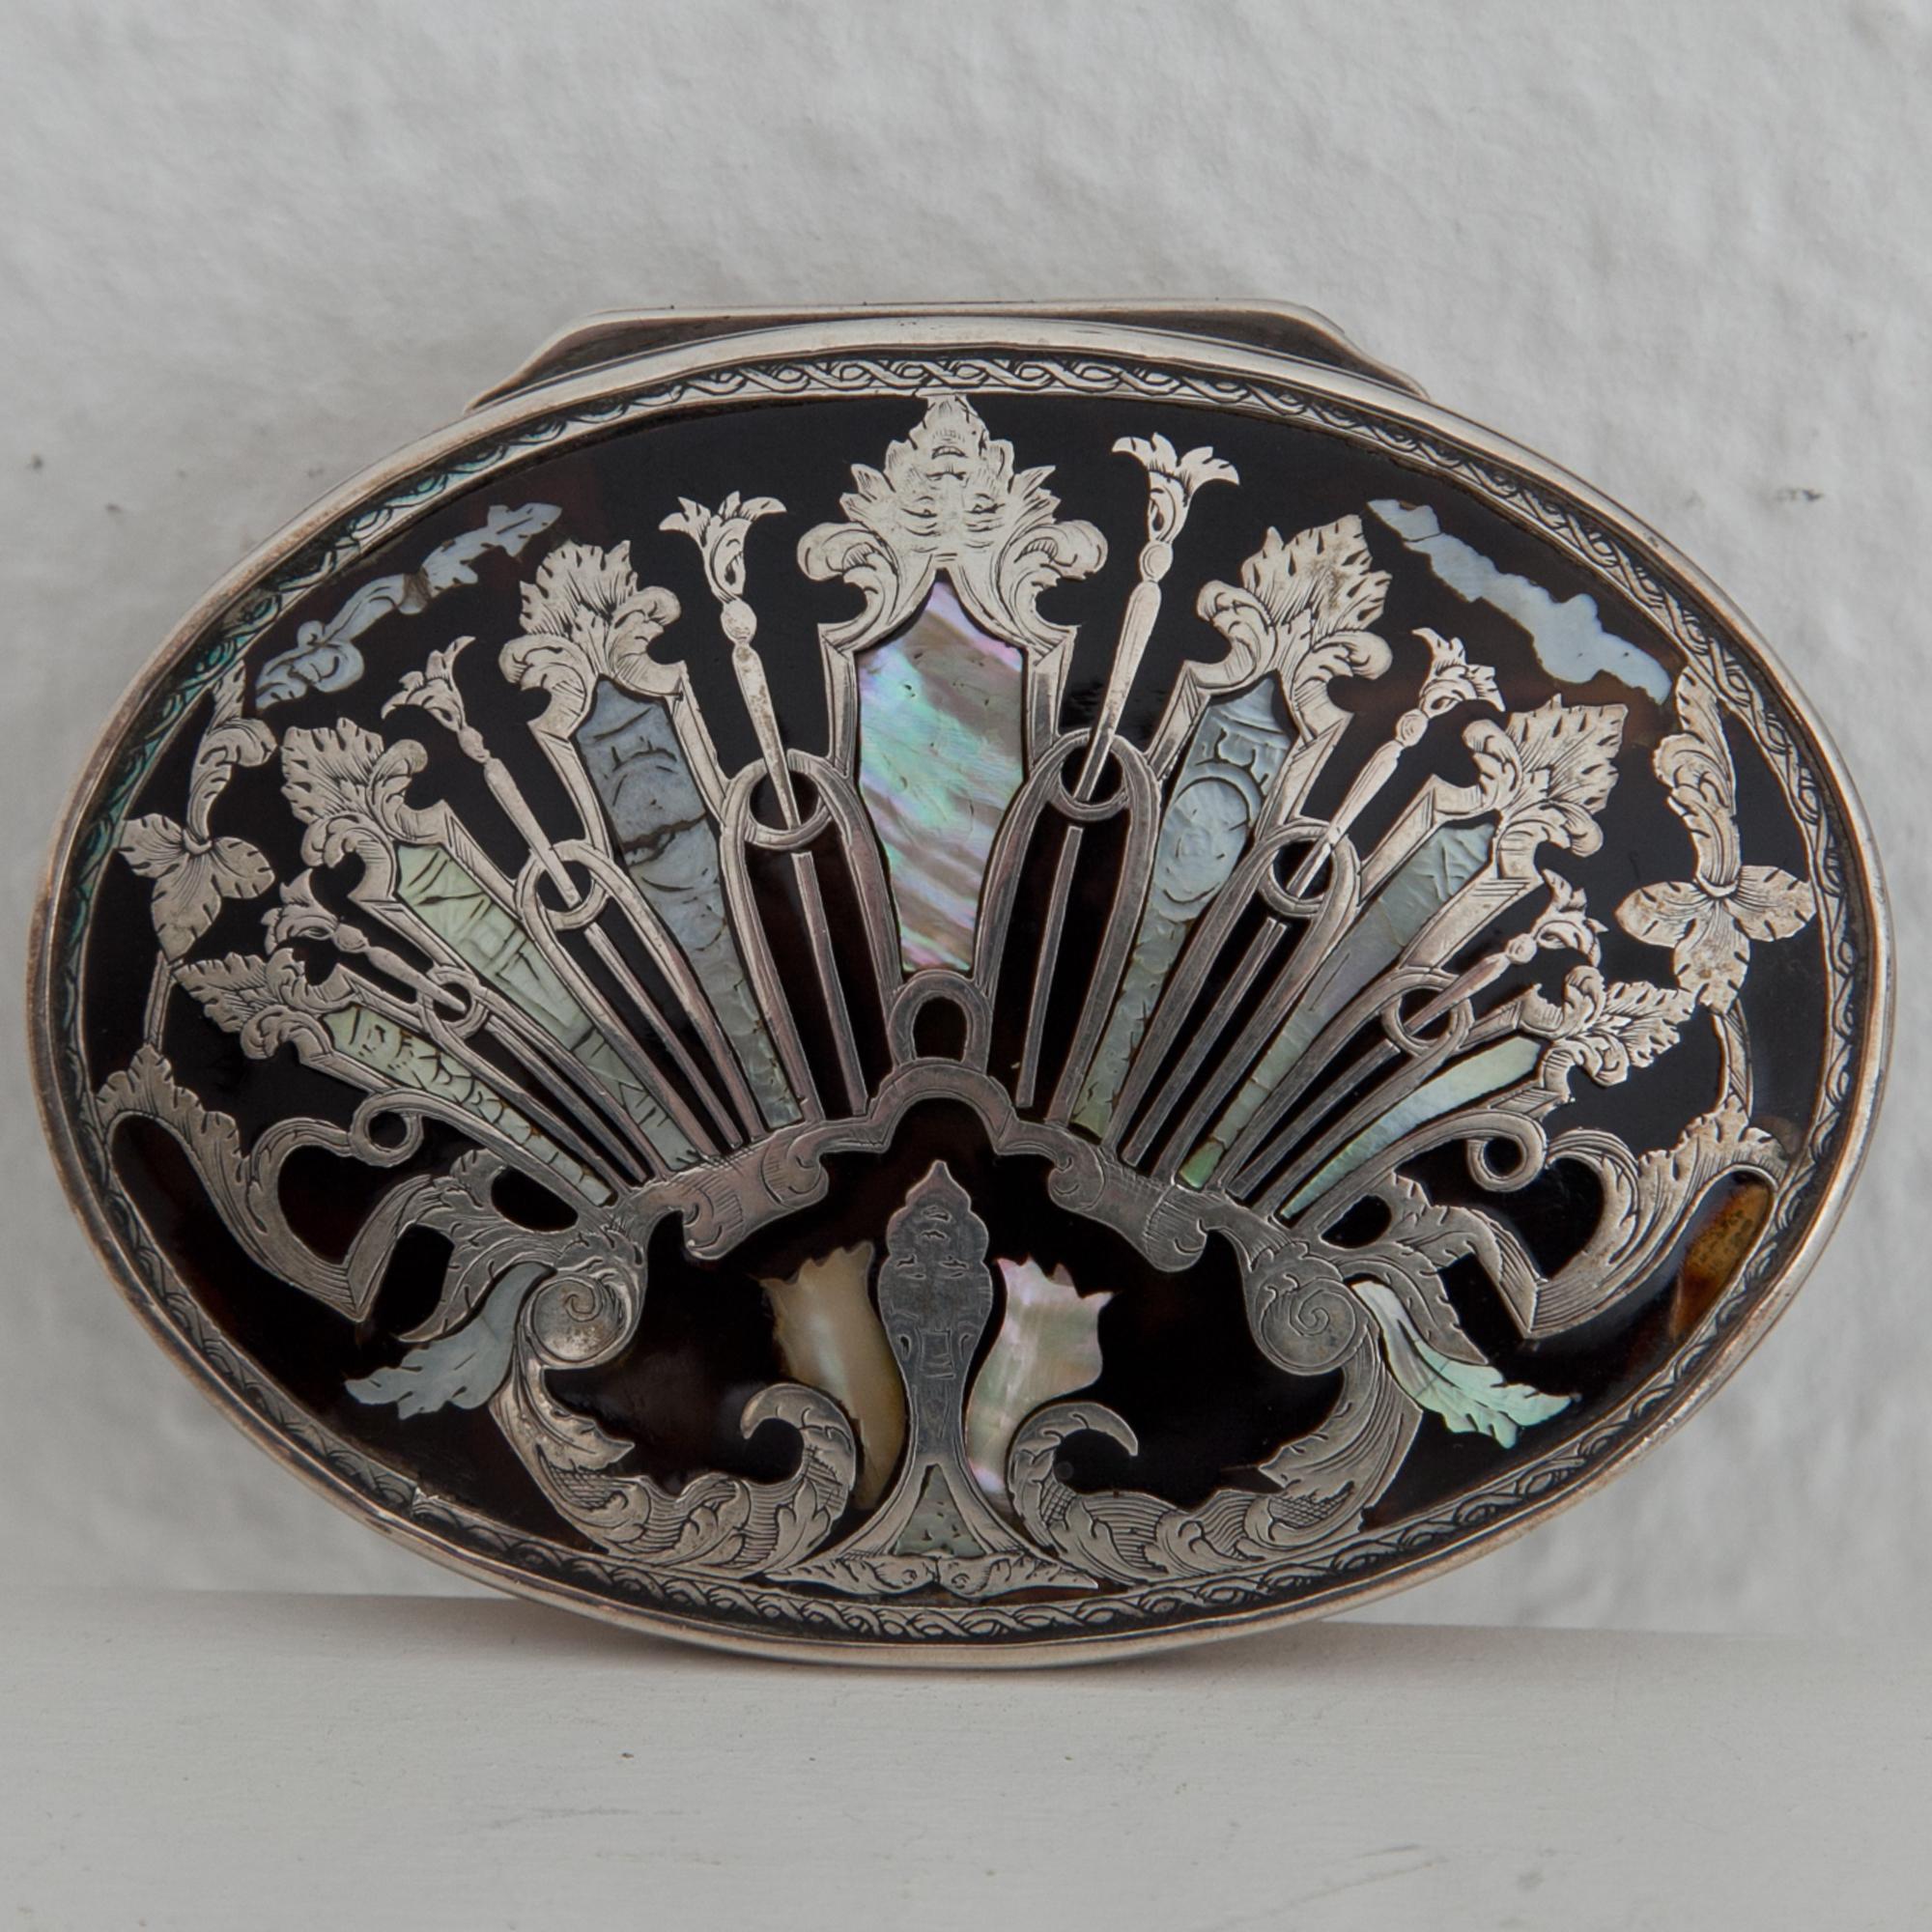 Oval lidded box with fan-shaped ornament on the tortoiseshell lid as well as mother of pearl and silver inlays.